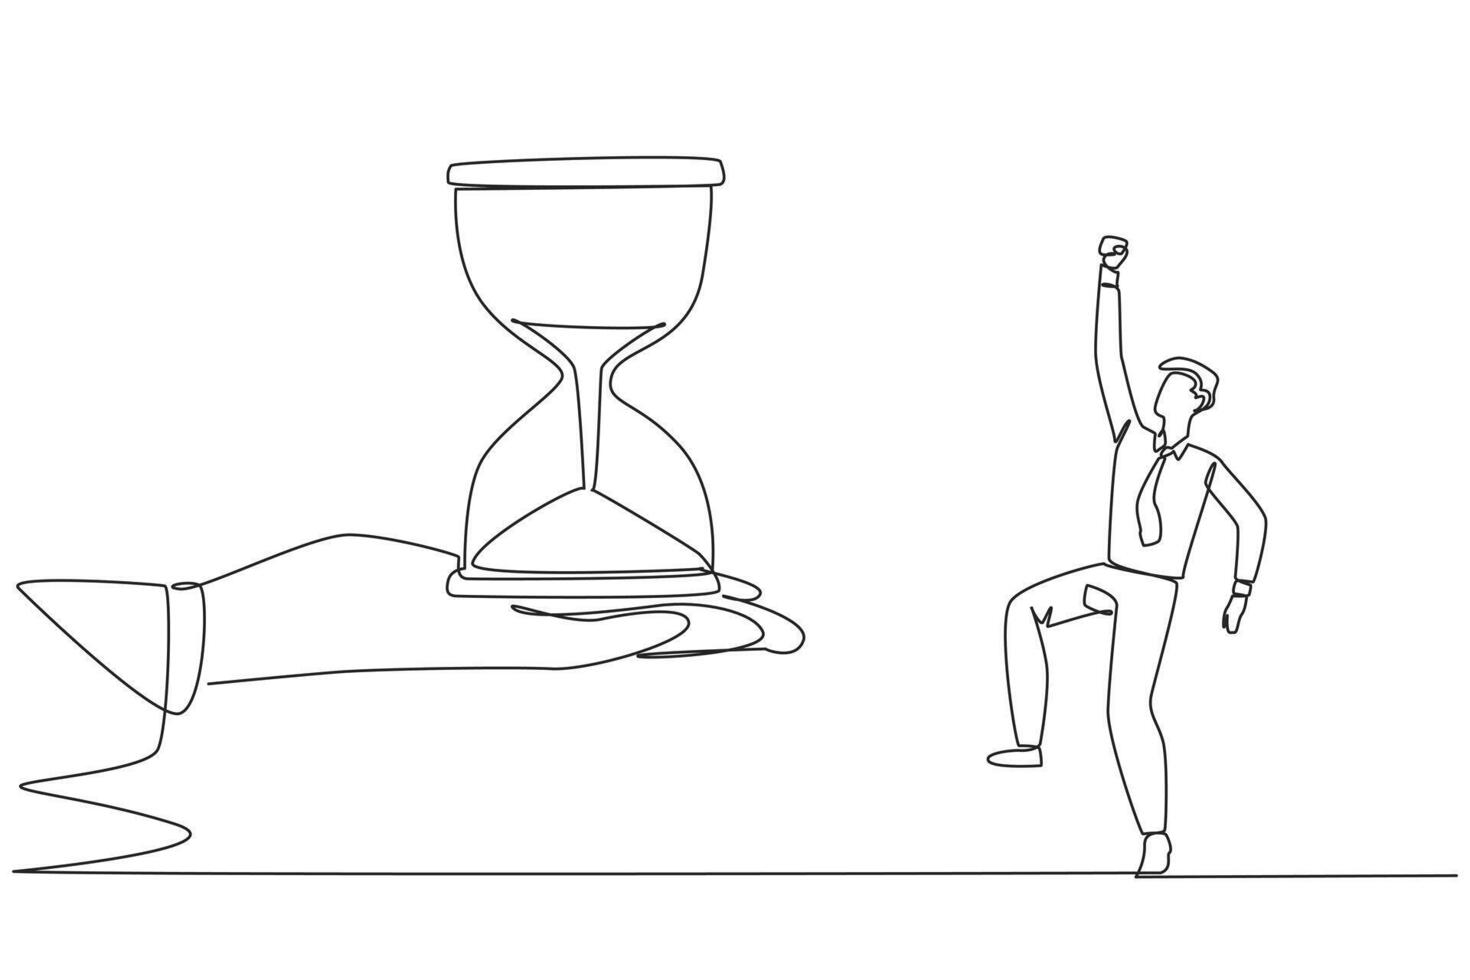 Continuous one line drawing the businessman was excited to get the hourglass from the giant hand. Concern about deadlines. Teamwork makes everything easier. Single line draw design illustration vector